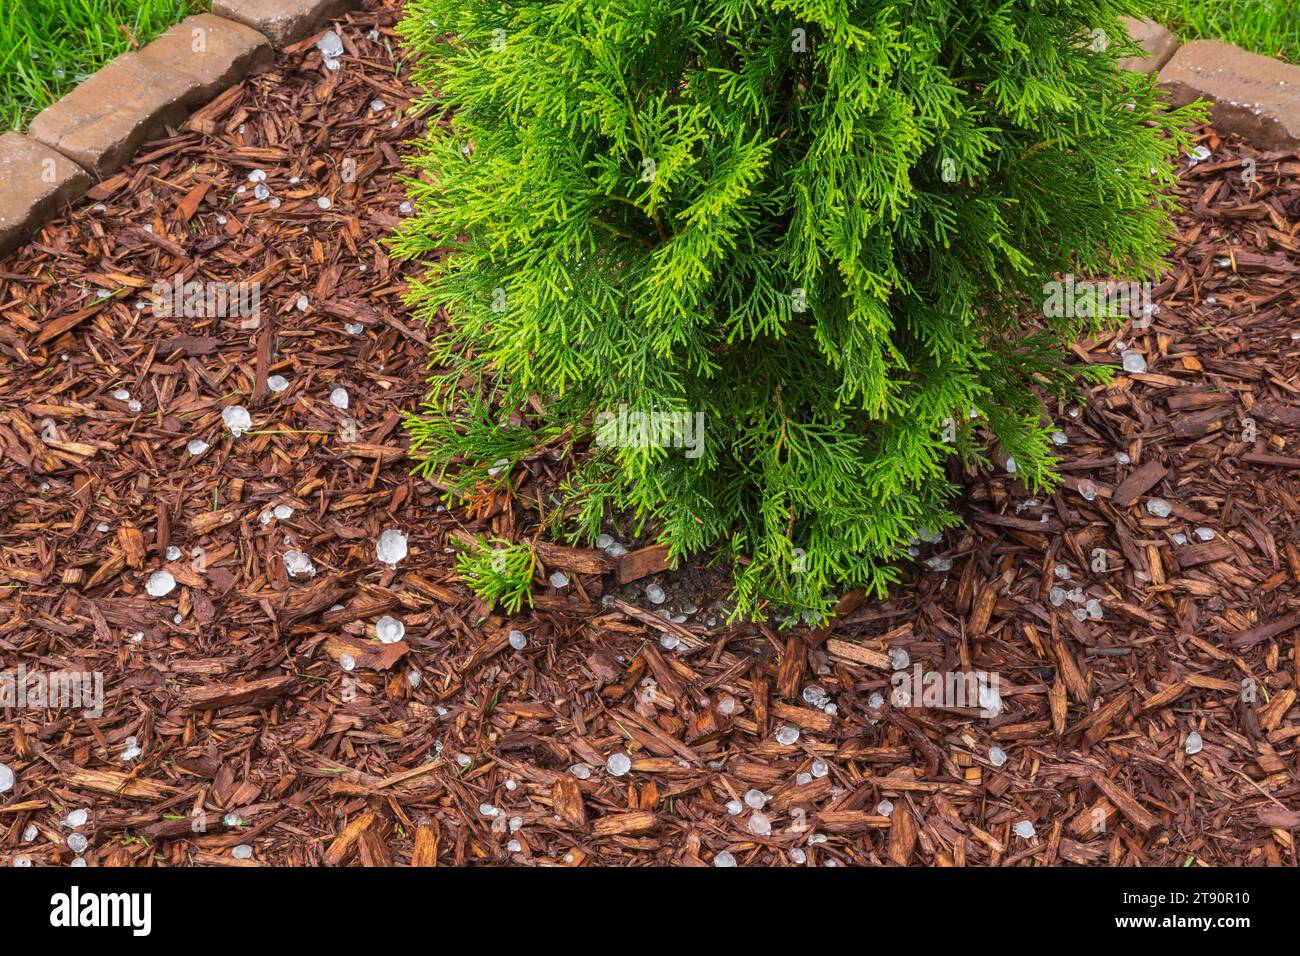 Thuja occidentalis 'Smaragd' - Cedar tree in stone edged brown mulch border with hail pellets in summer. Stock Photo